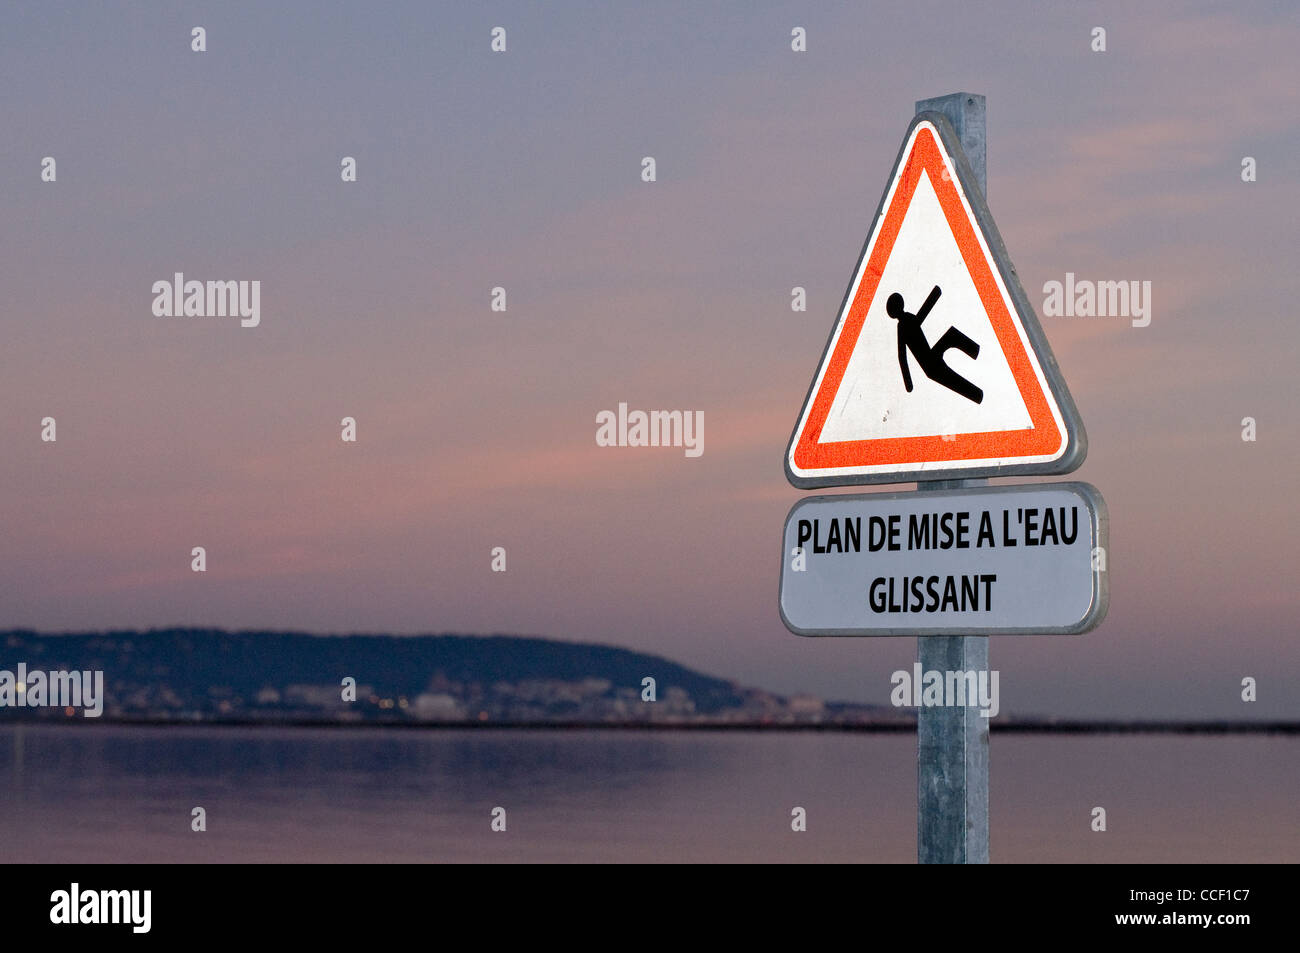 Slippery surface sign(in French) against view of Lake. Stock Photo